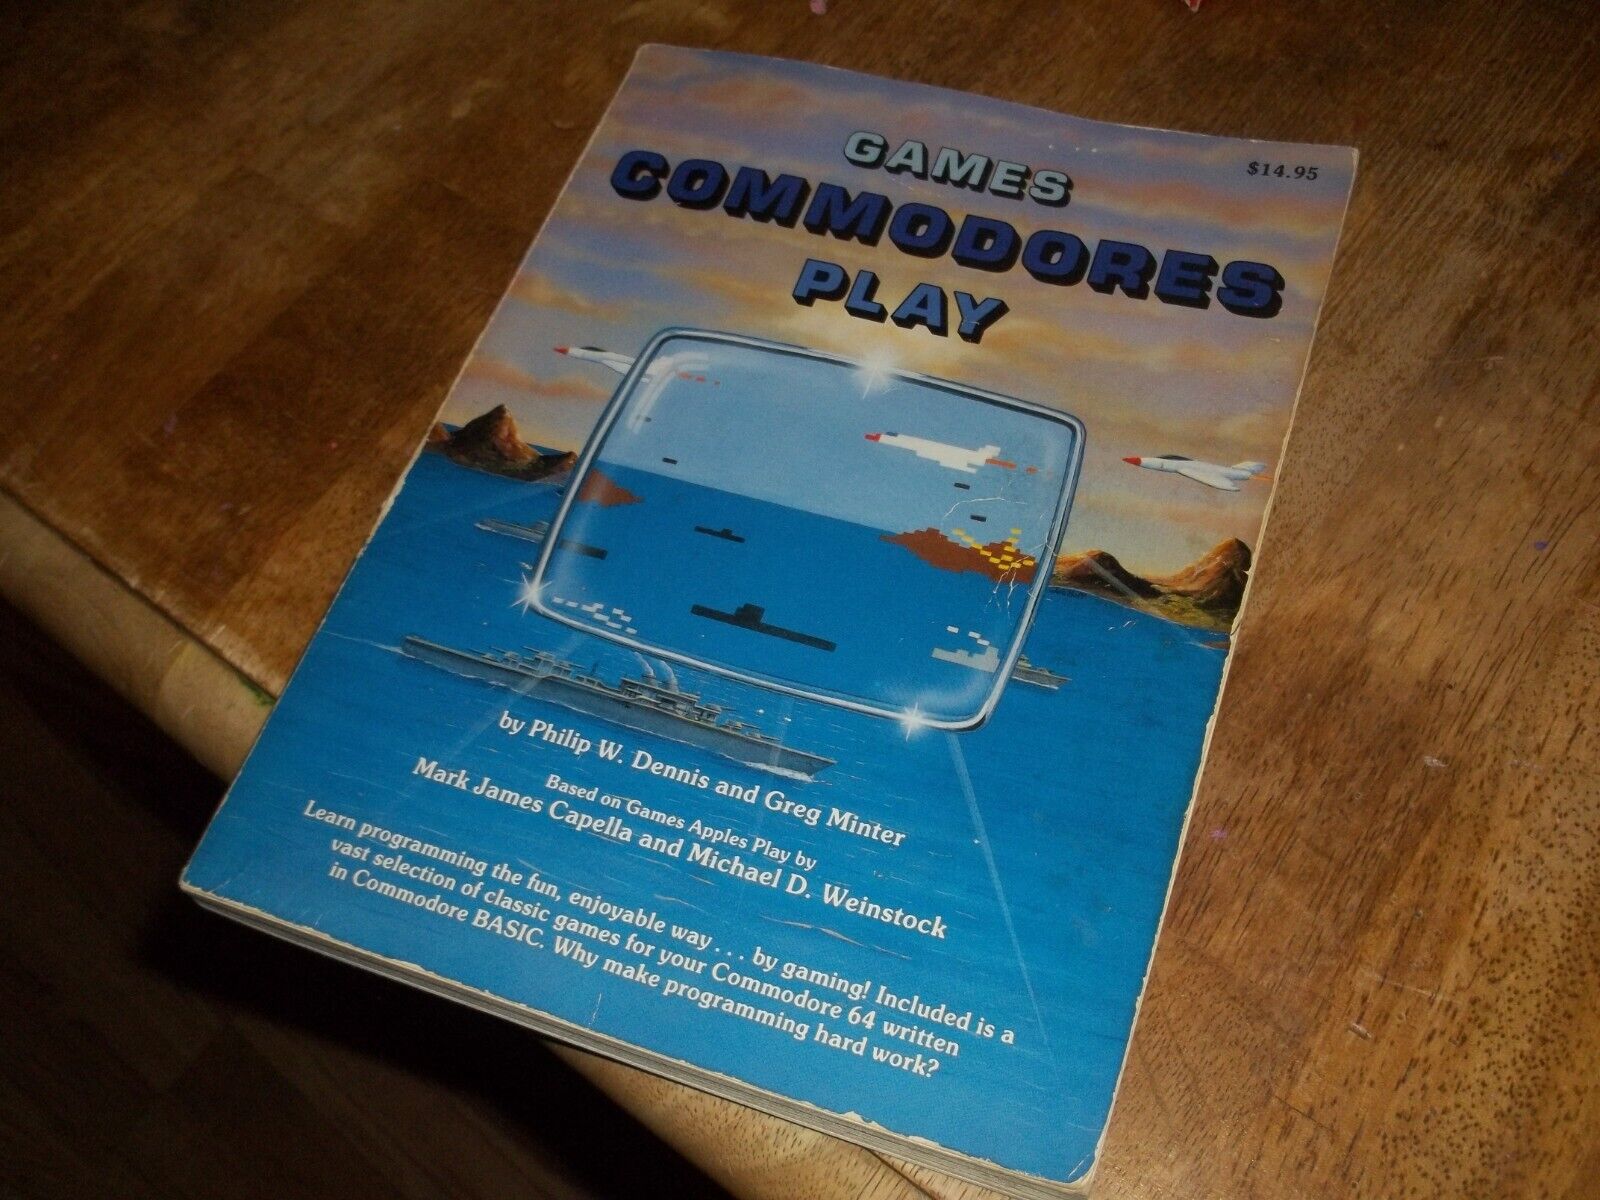 Vintage Games Commodores Play Commodore 64 book ST534